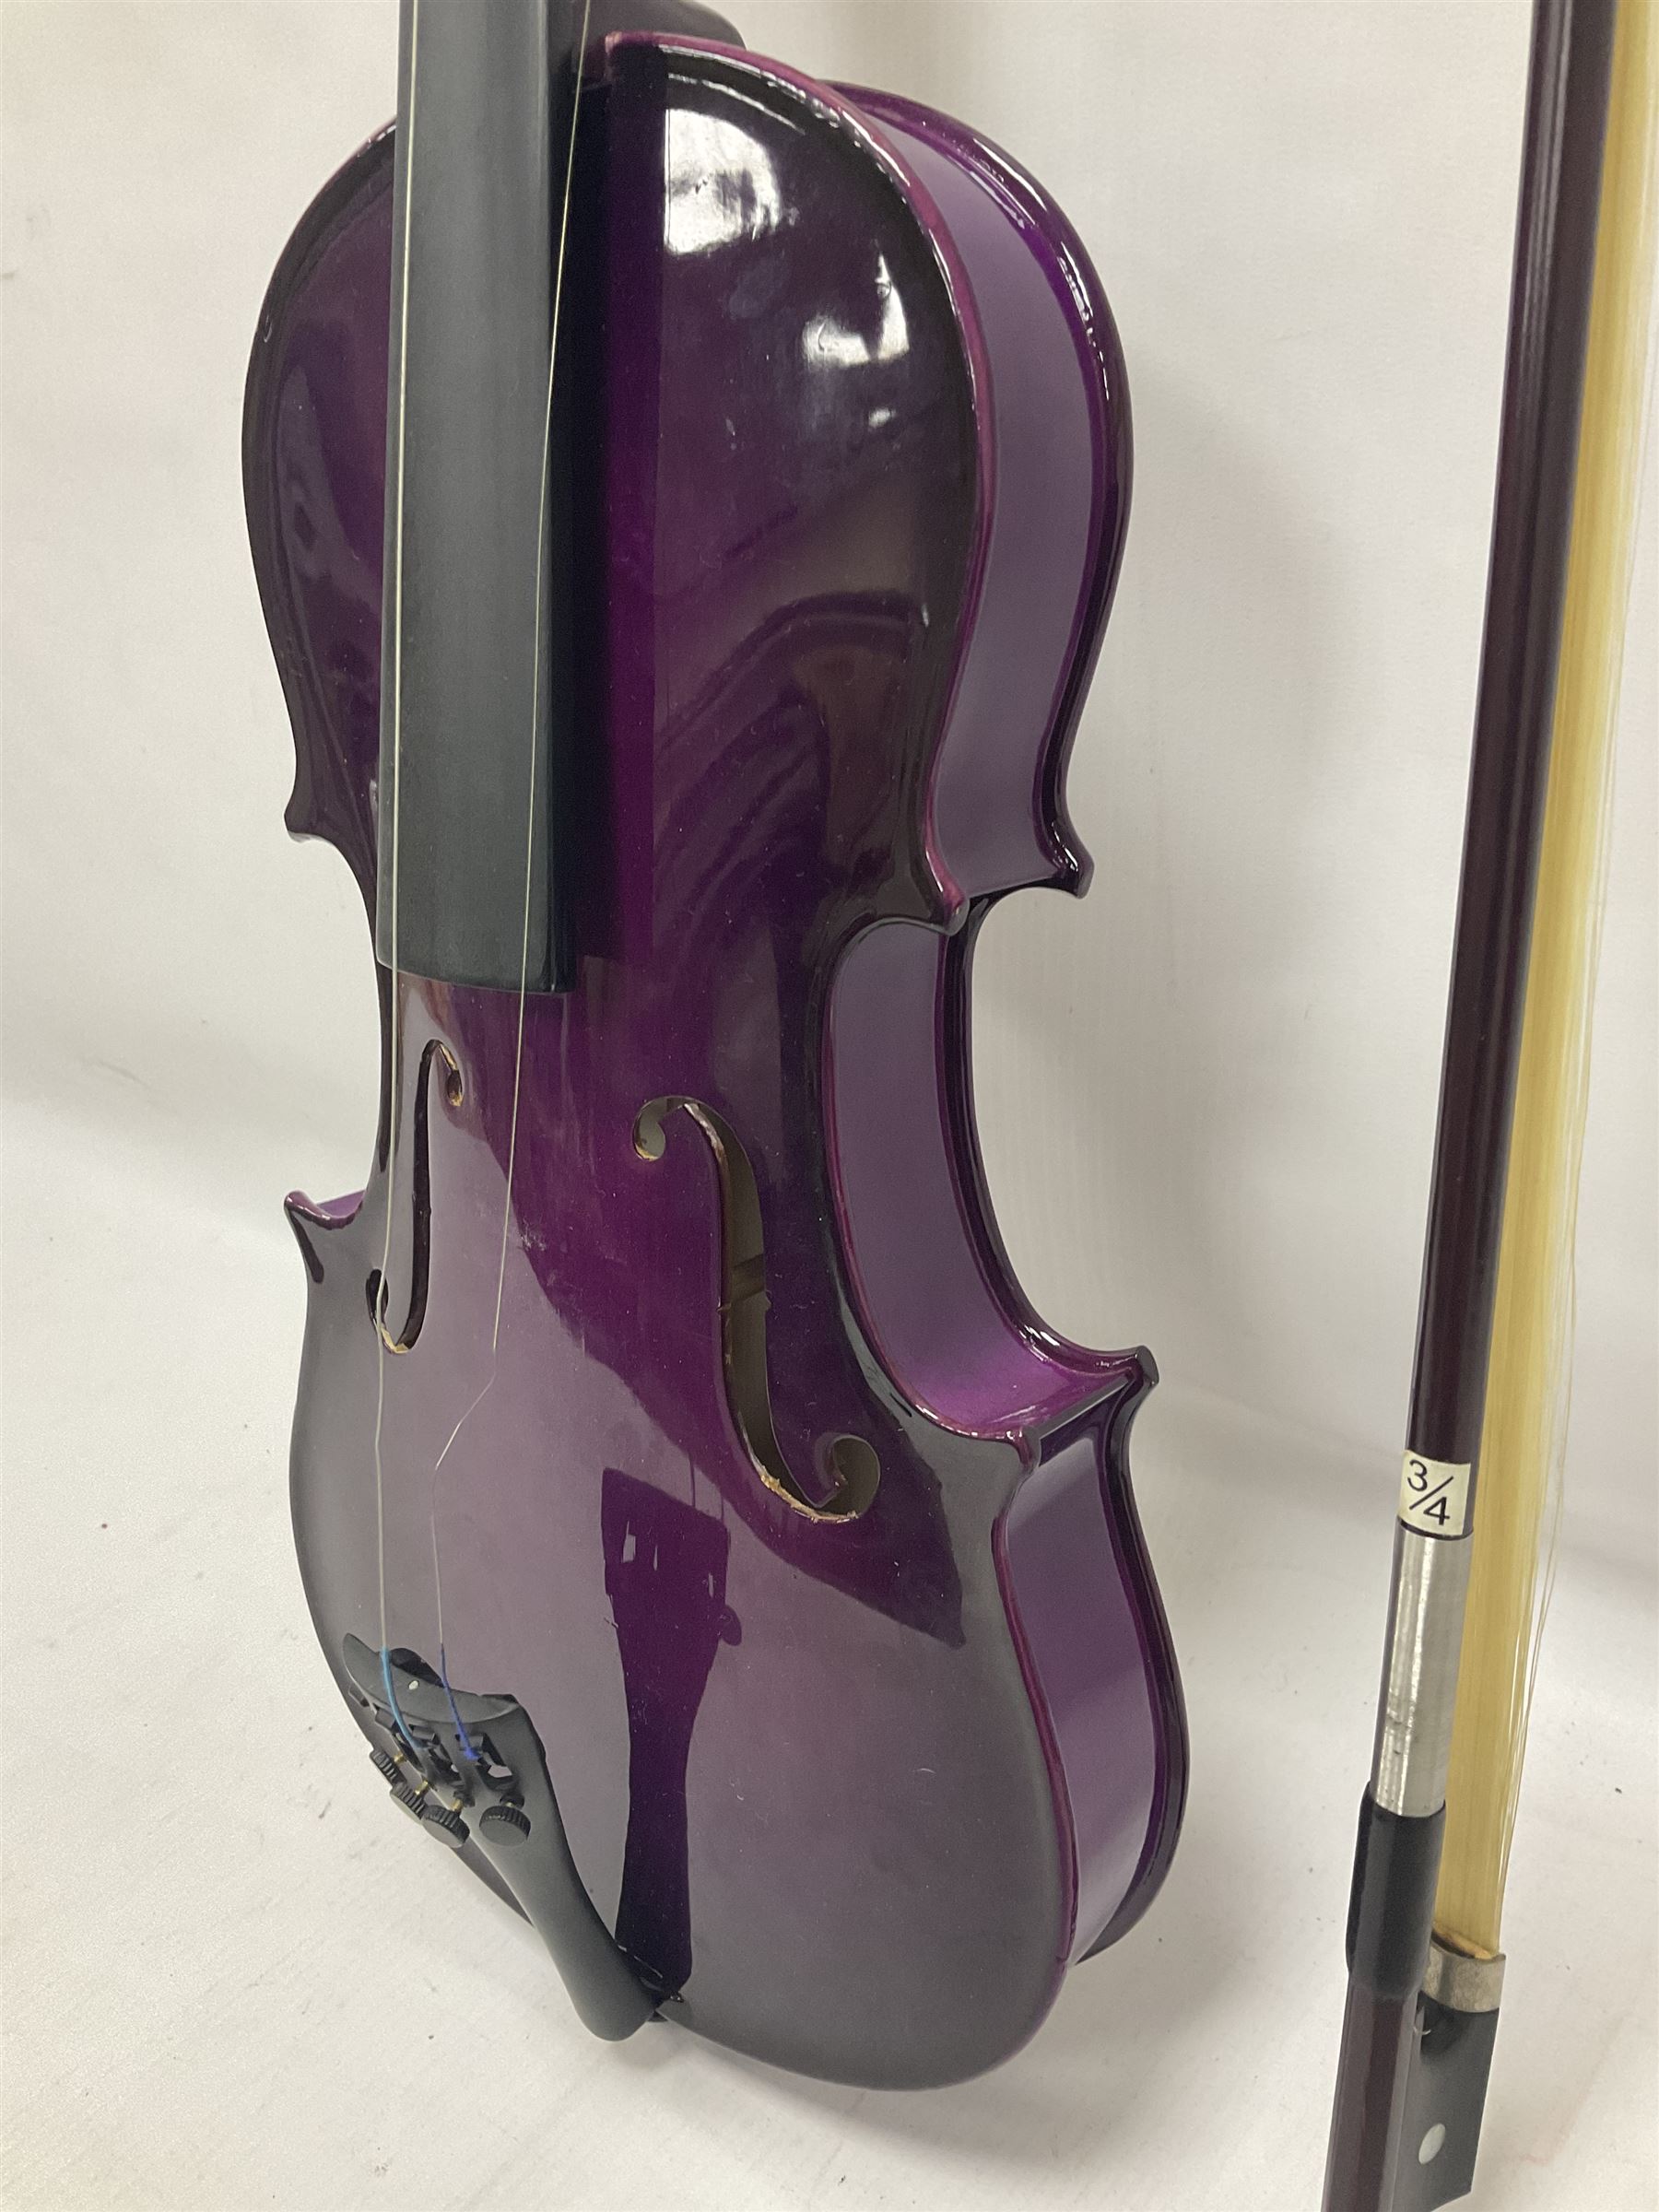 Intermusic 3/4 violin with a violet coloured solid wood body - Image 10 of 25